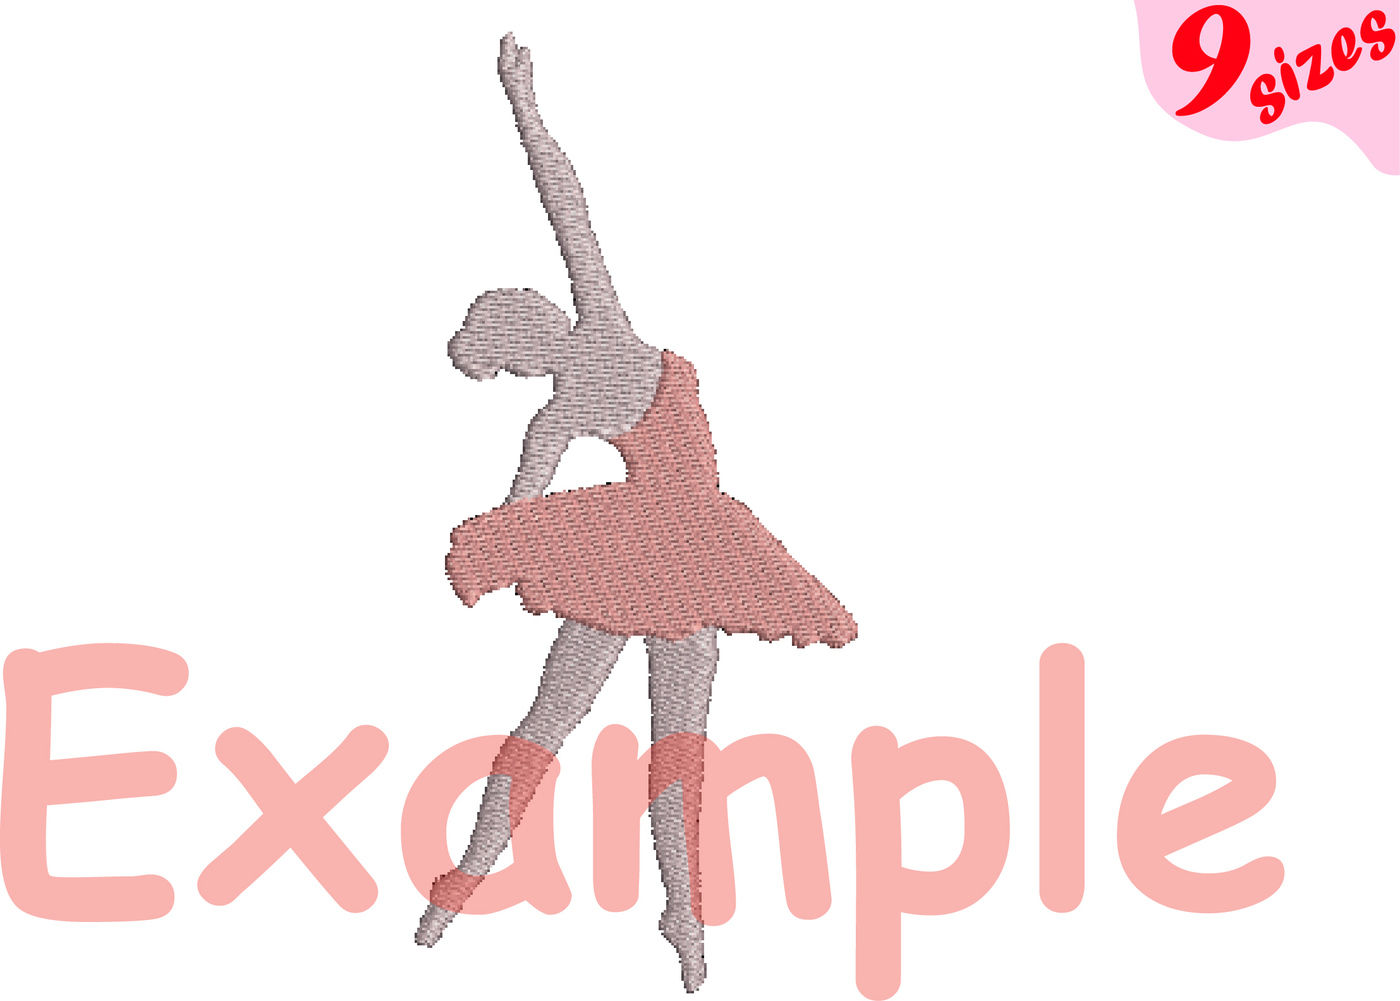 Ballet Ballerina Designs for Embroidery Machine Instant Download Commercial Use digital file 4x4 5x7 hoop icon symbol sign ribbon Dancer 43b